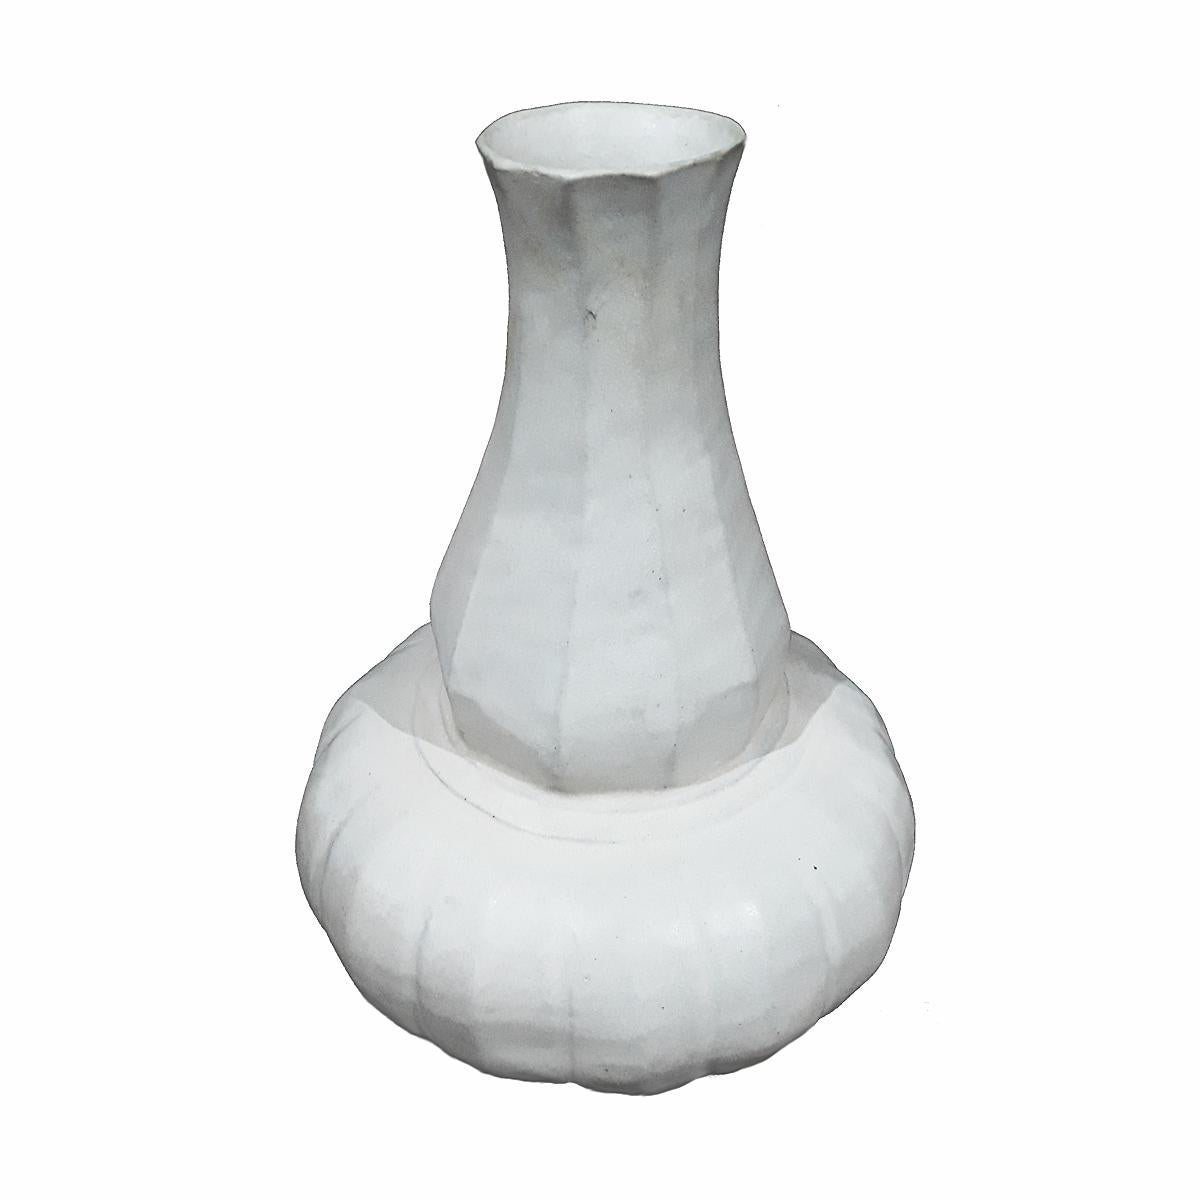 A white ceramic vase from Thailand, circa 1900. Gloss white finish, flower-shaped and tapered neck.